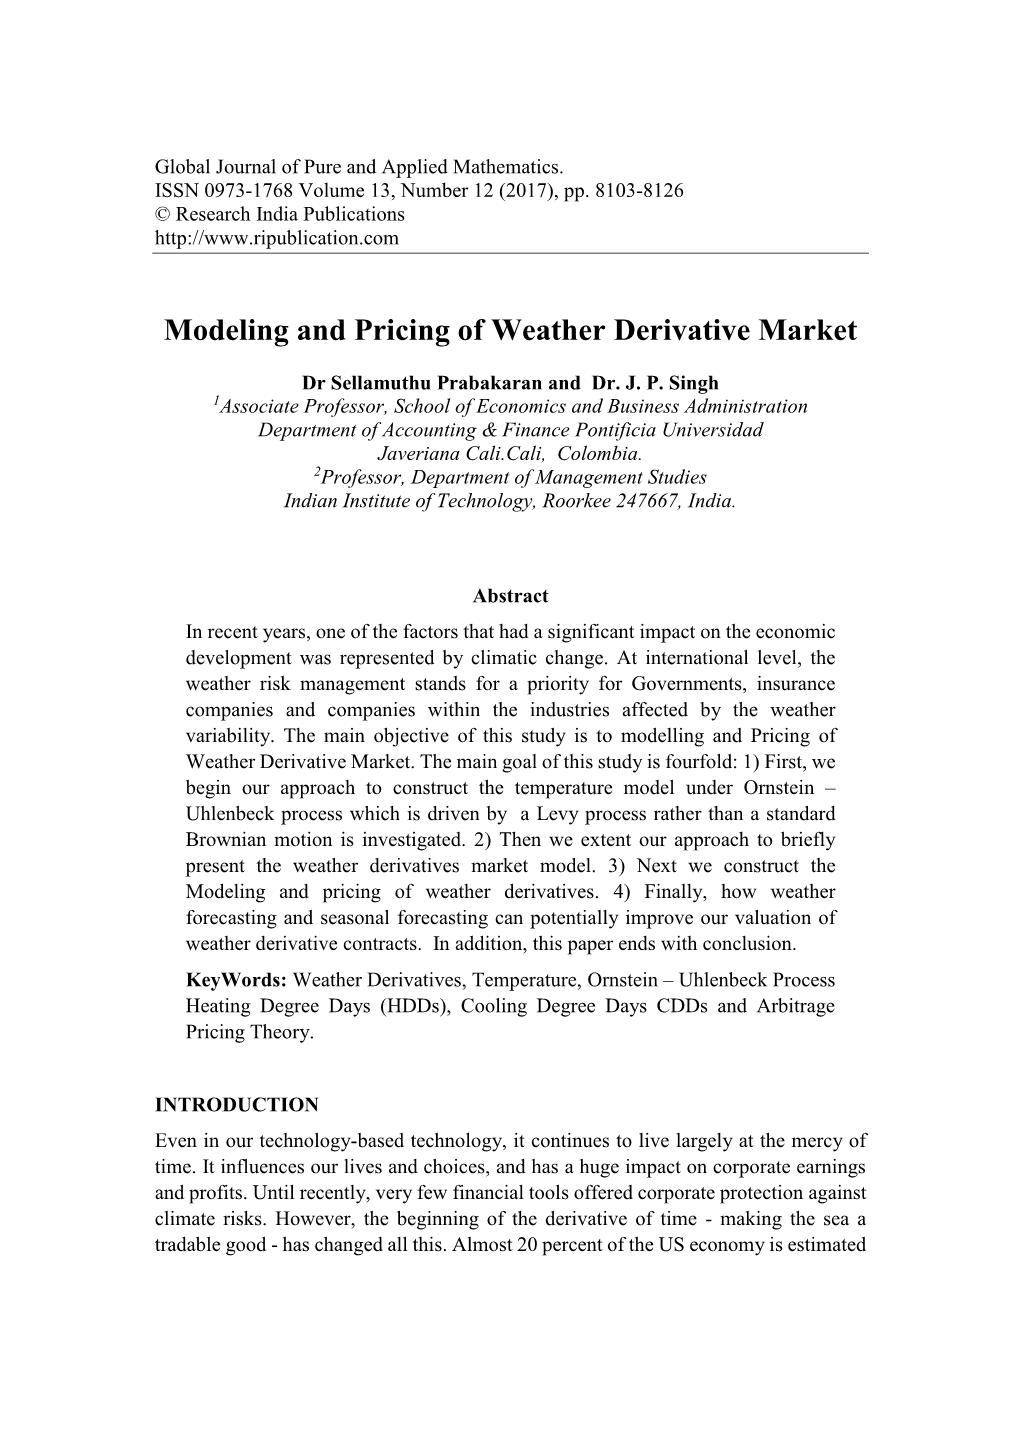 Modeling and Pricing of Weather Derivative Market